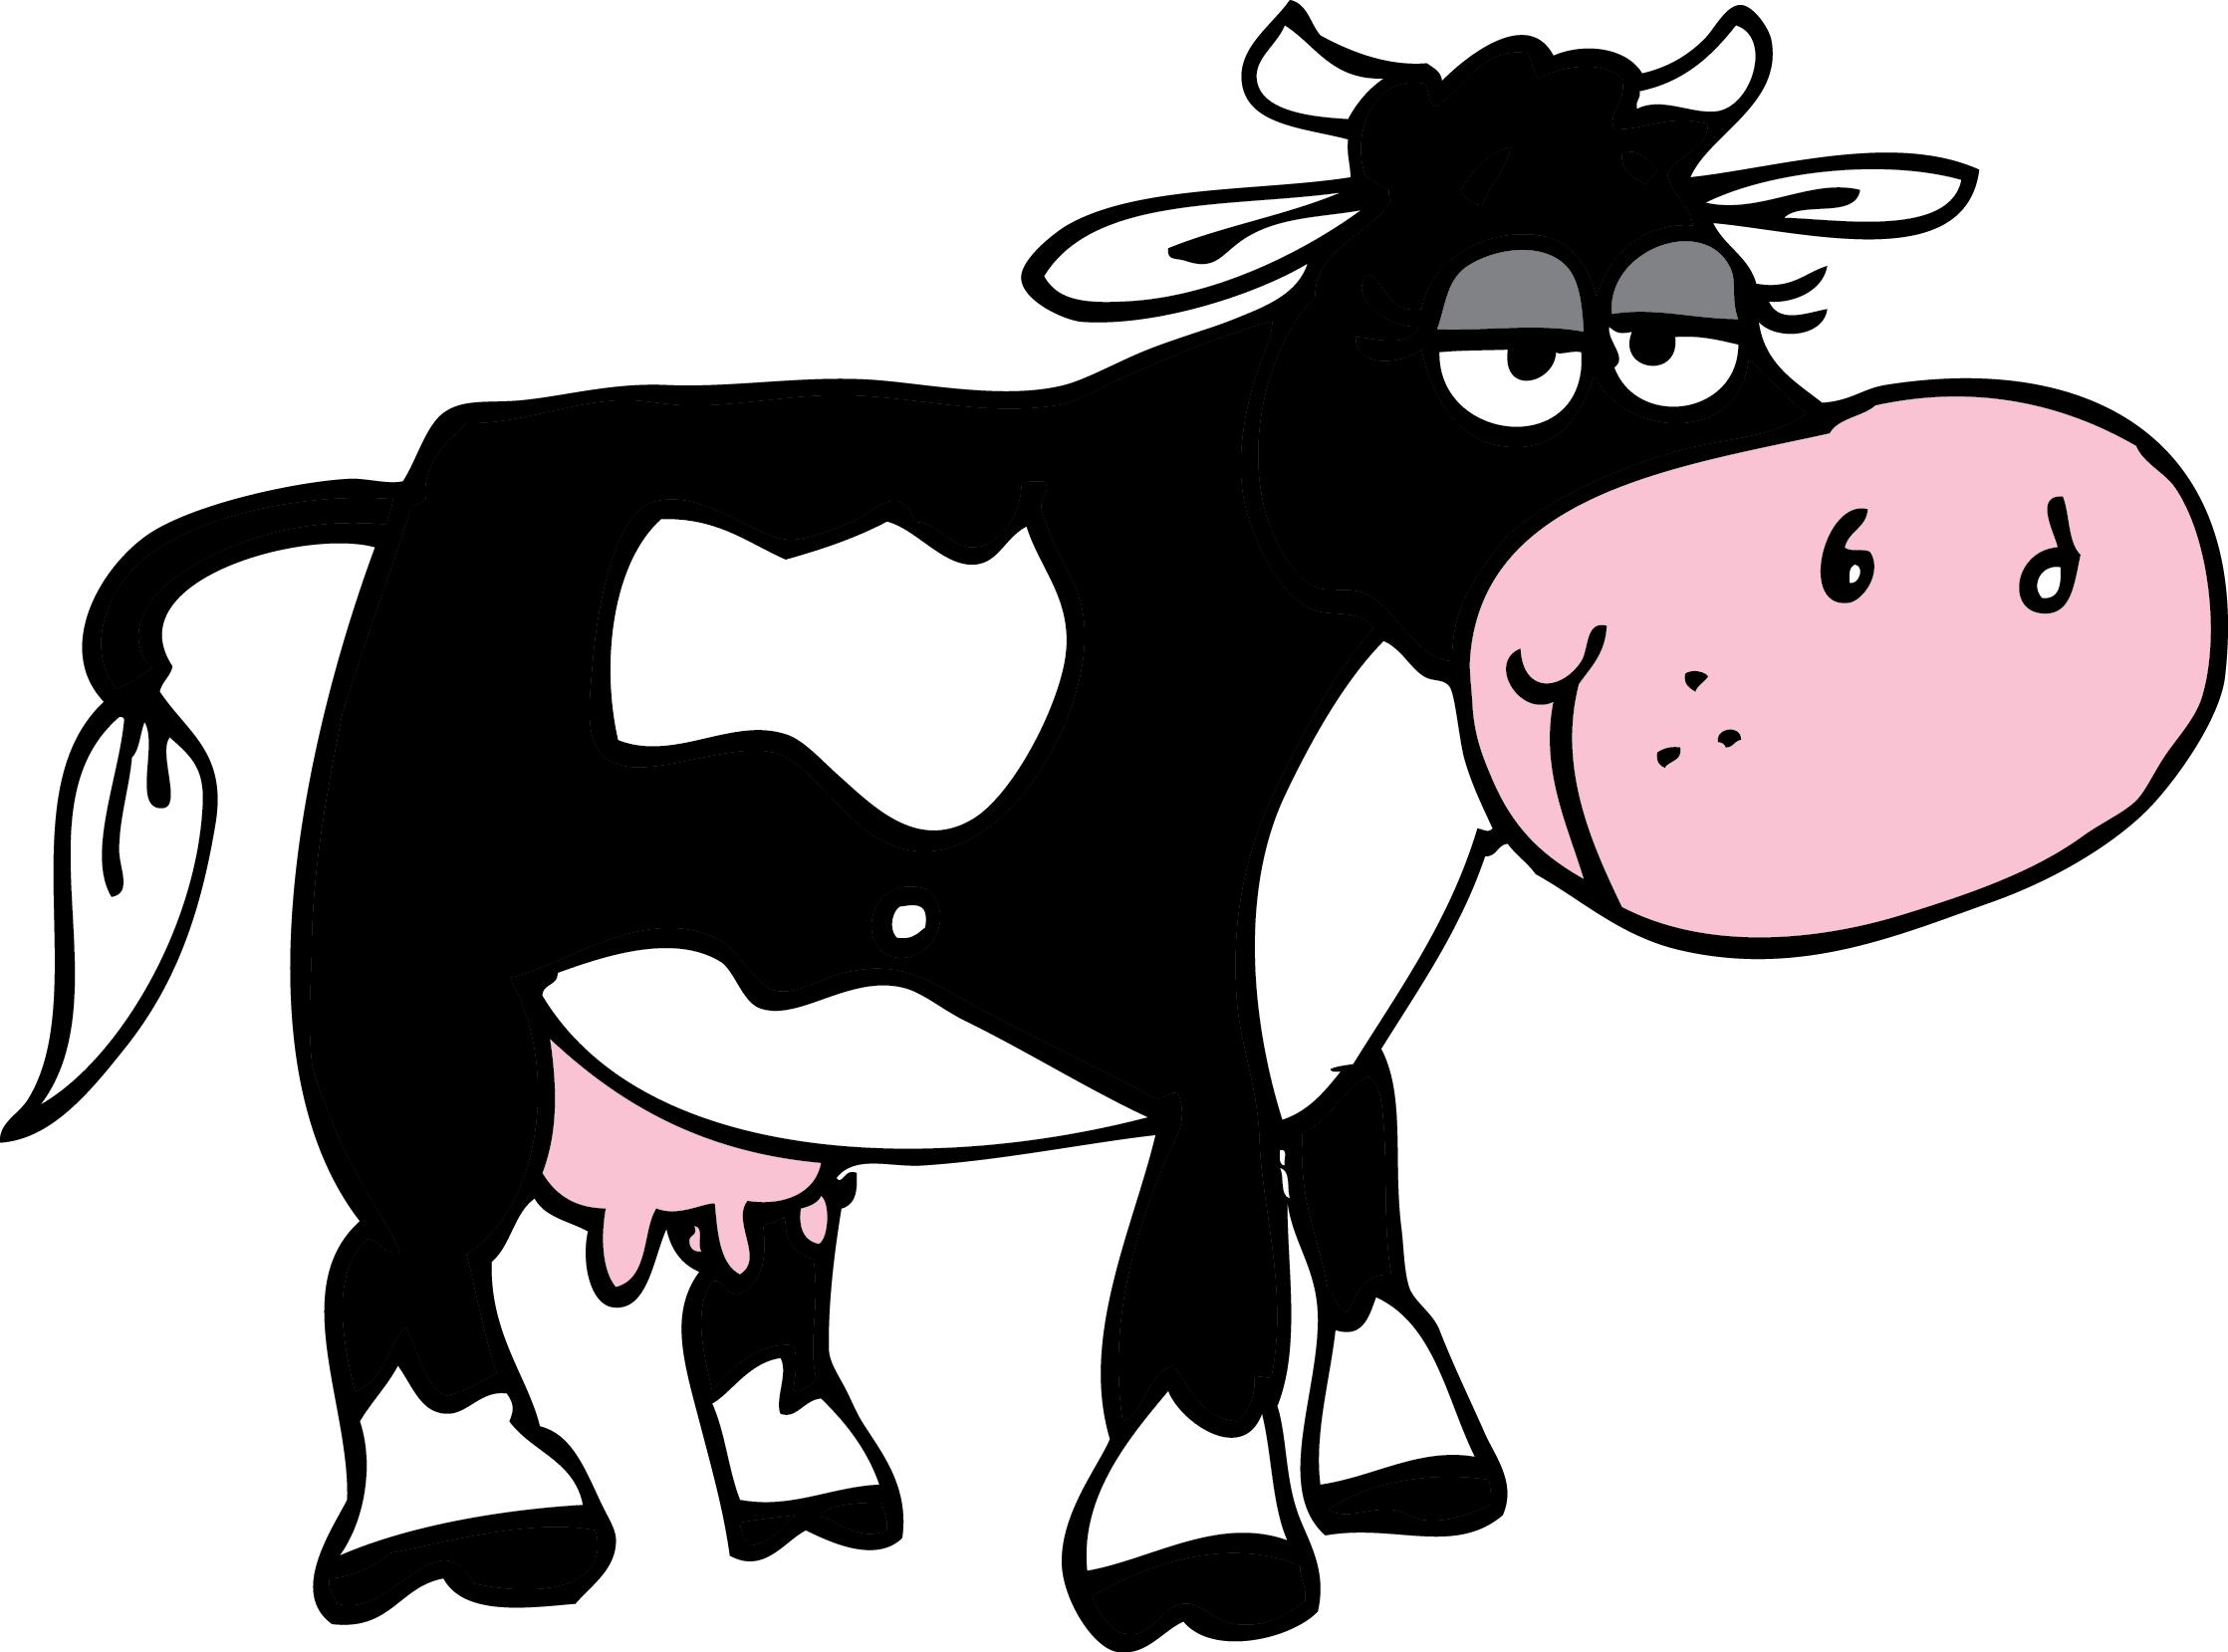 Cartoon Cow Jumping Images  Pictures - Becuo